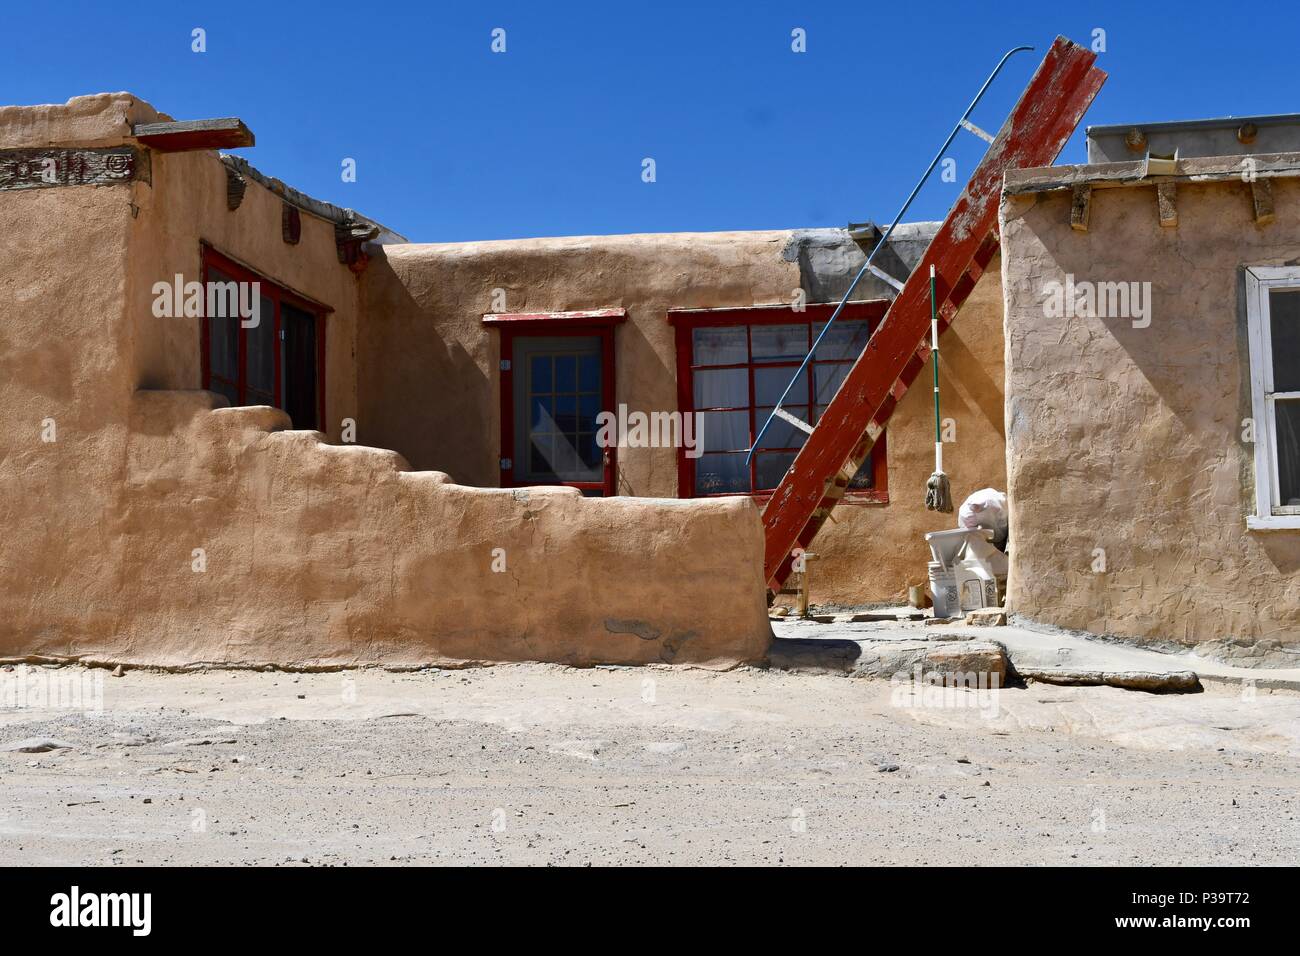 Red ladder with dangling mop in Acoma Pueblo Stock Photo